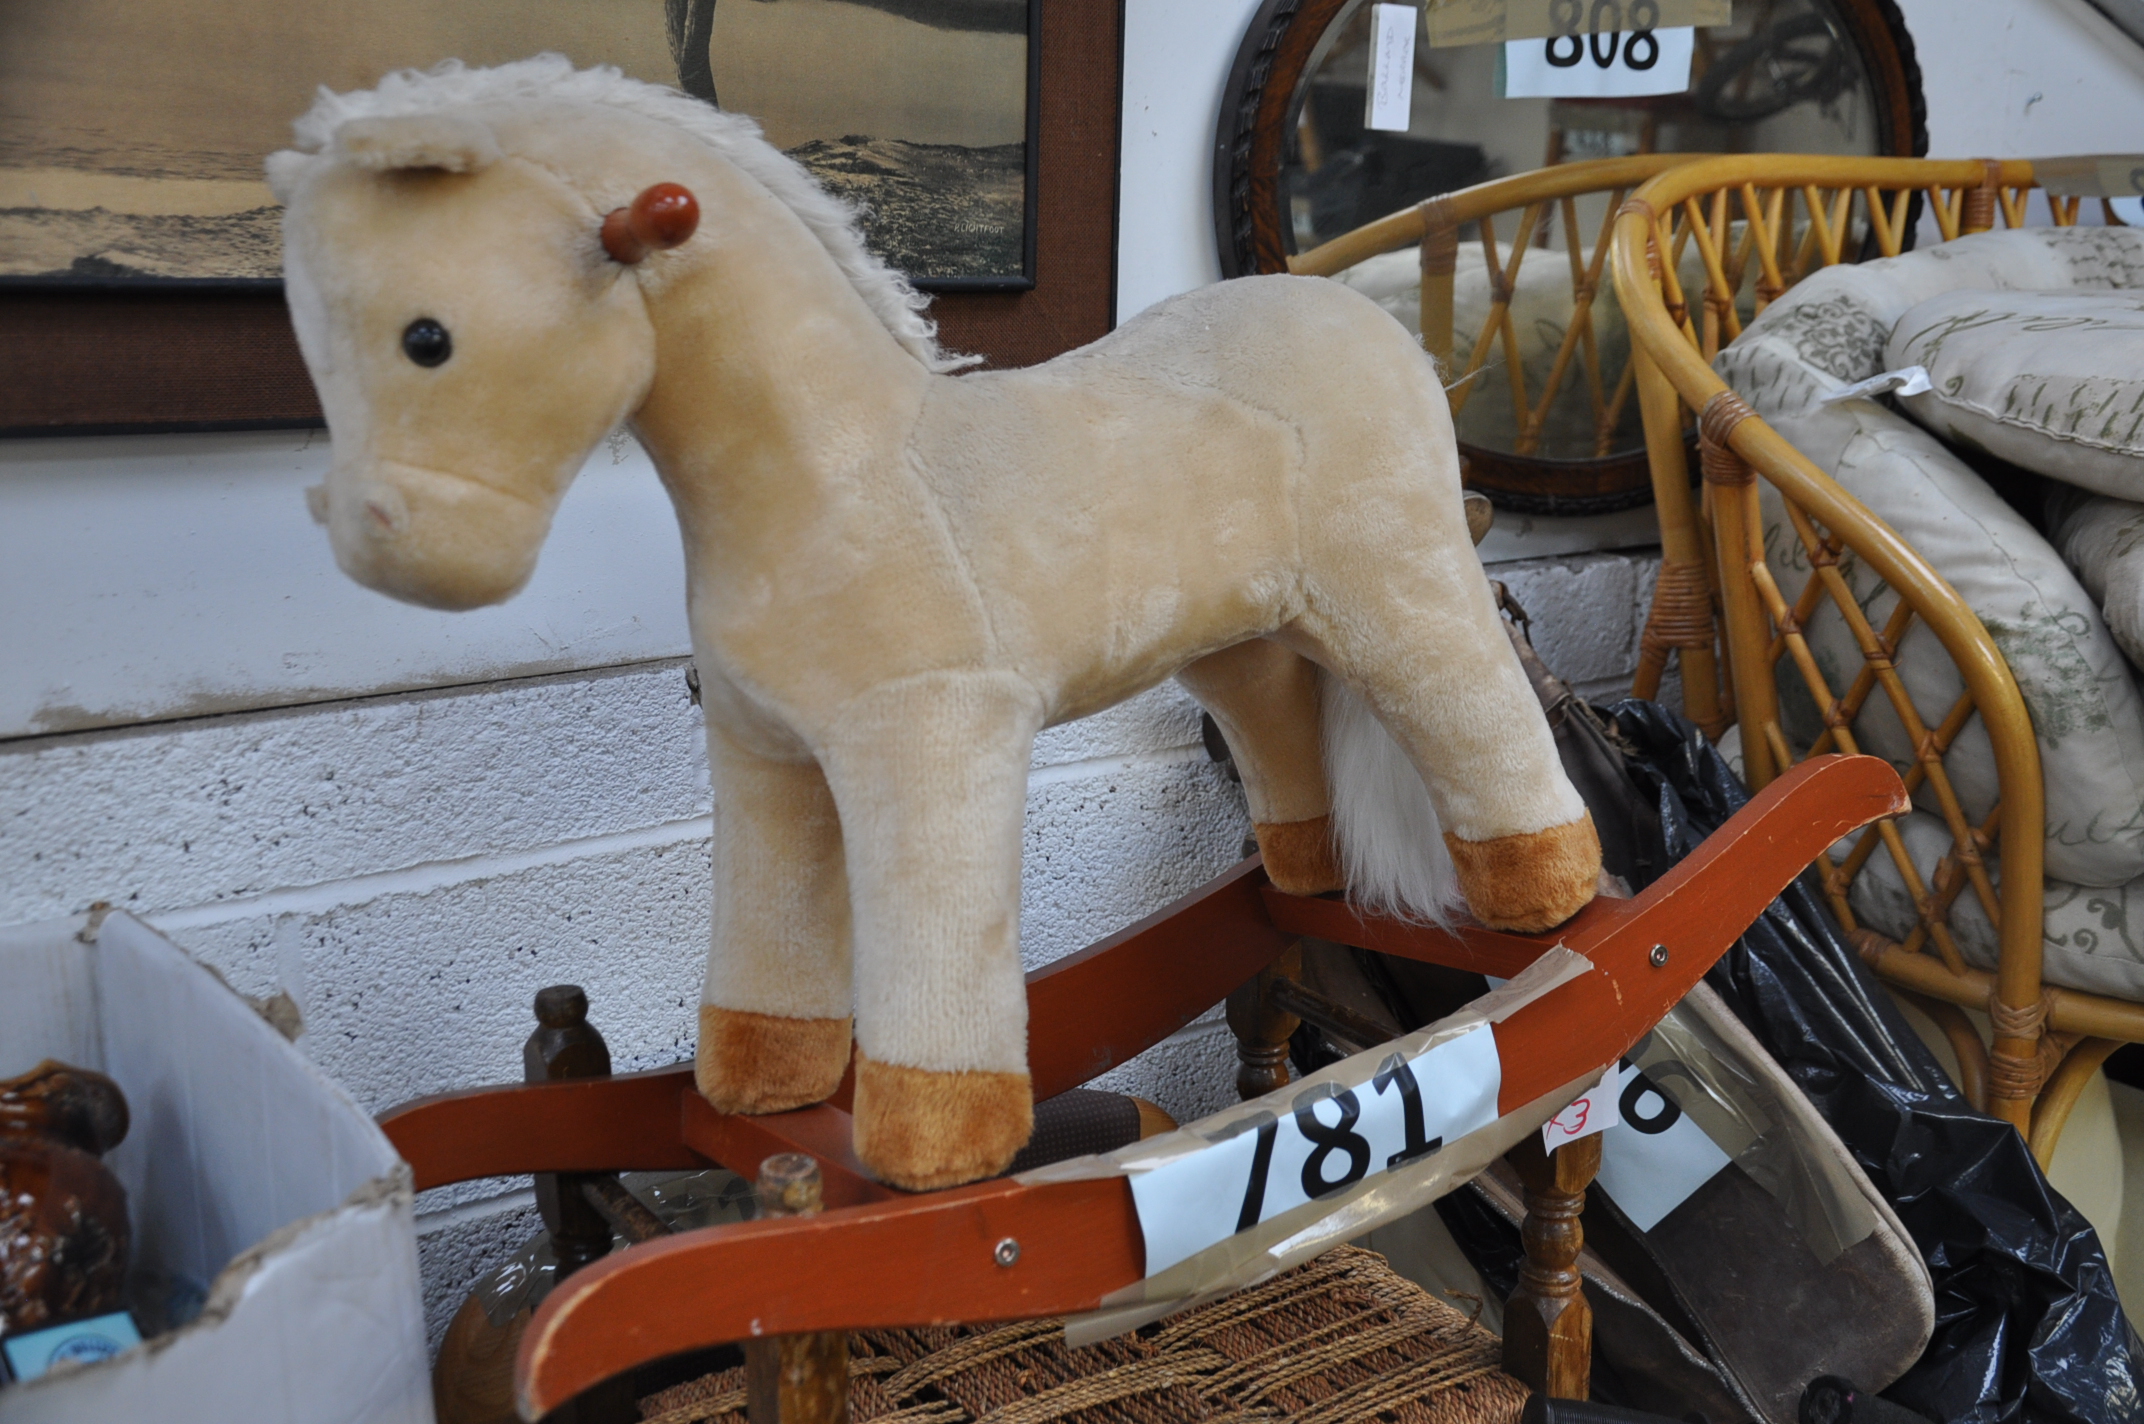 An all singing all dancing rocking horse